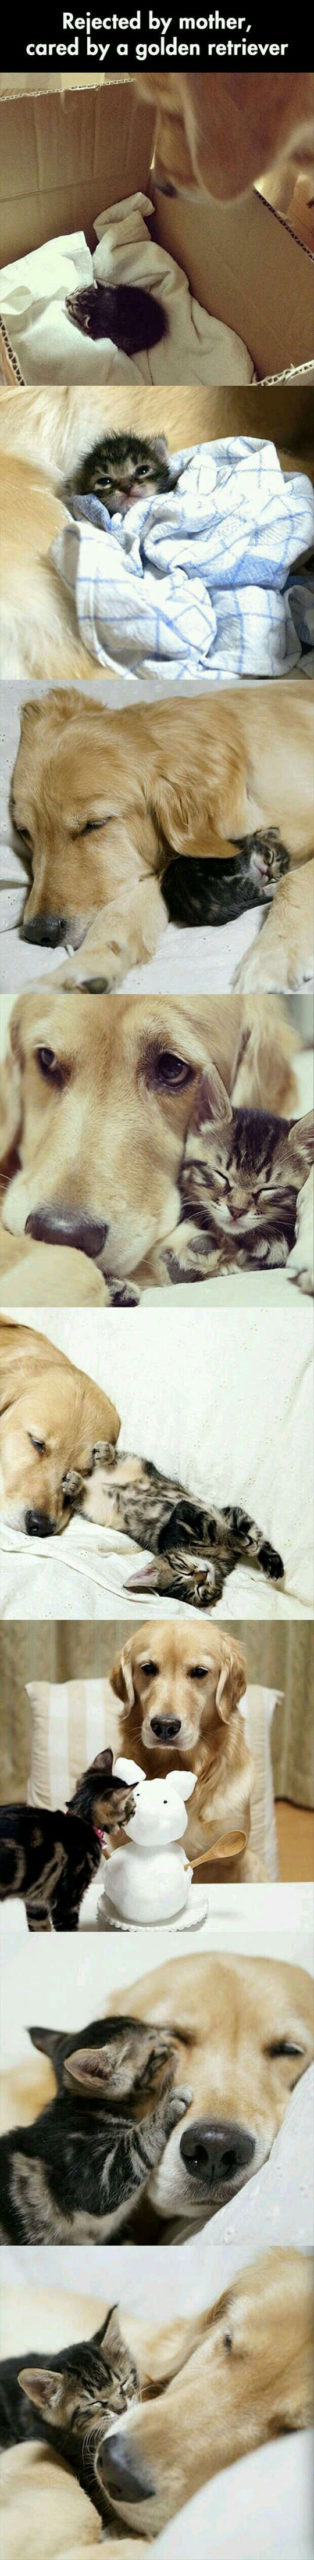 Puppers+taking+care+of+kitten